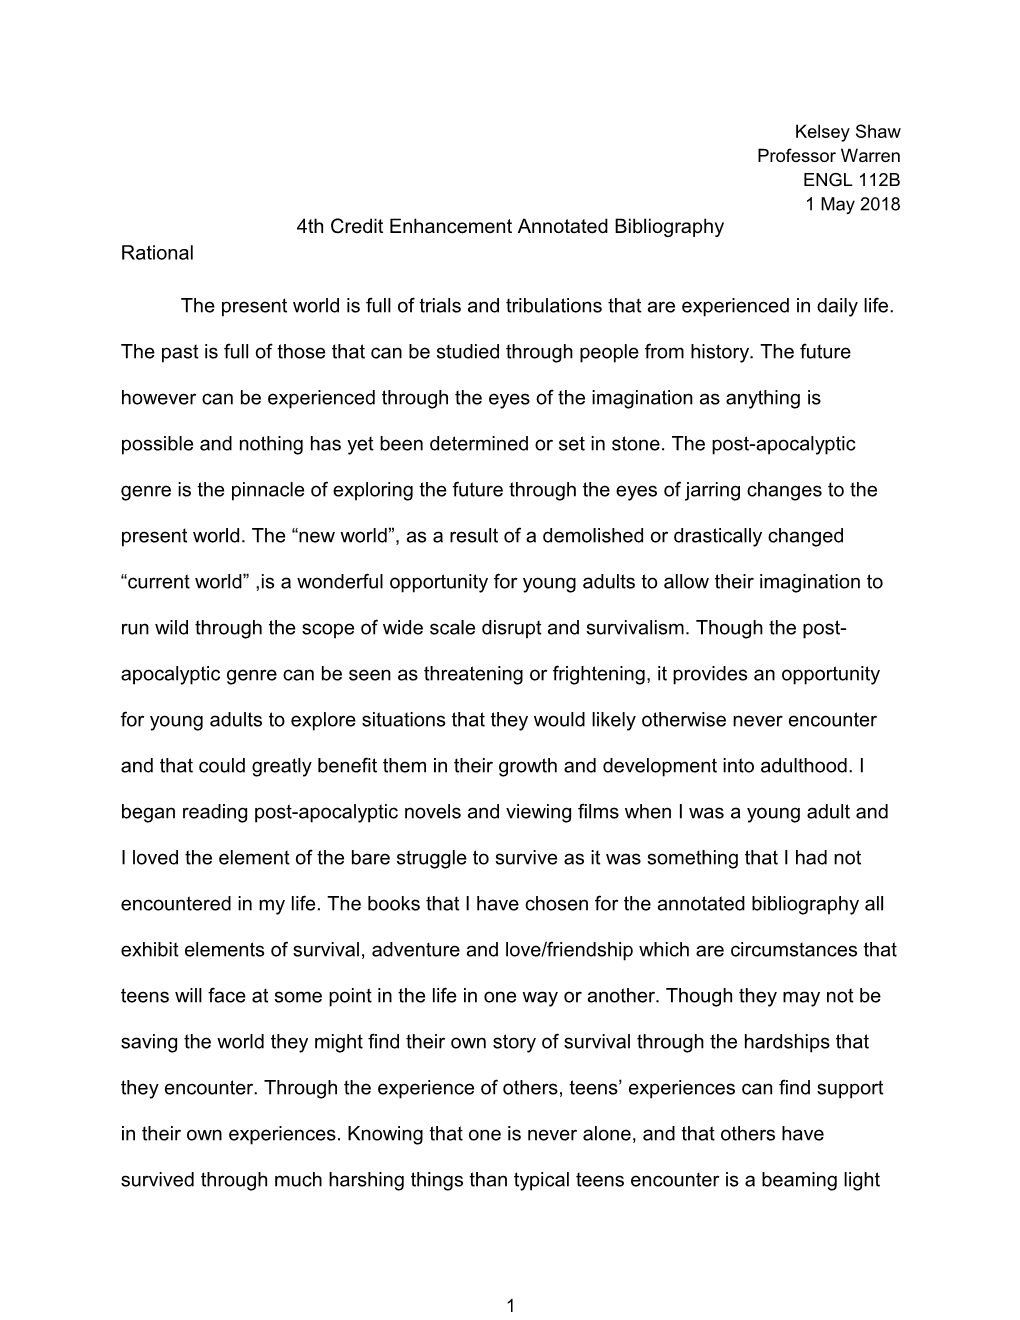 4Th Credit Enhancement Annotated Bibliography